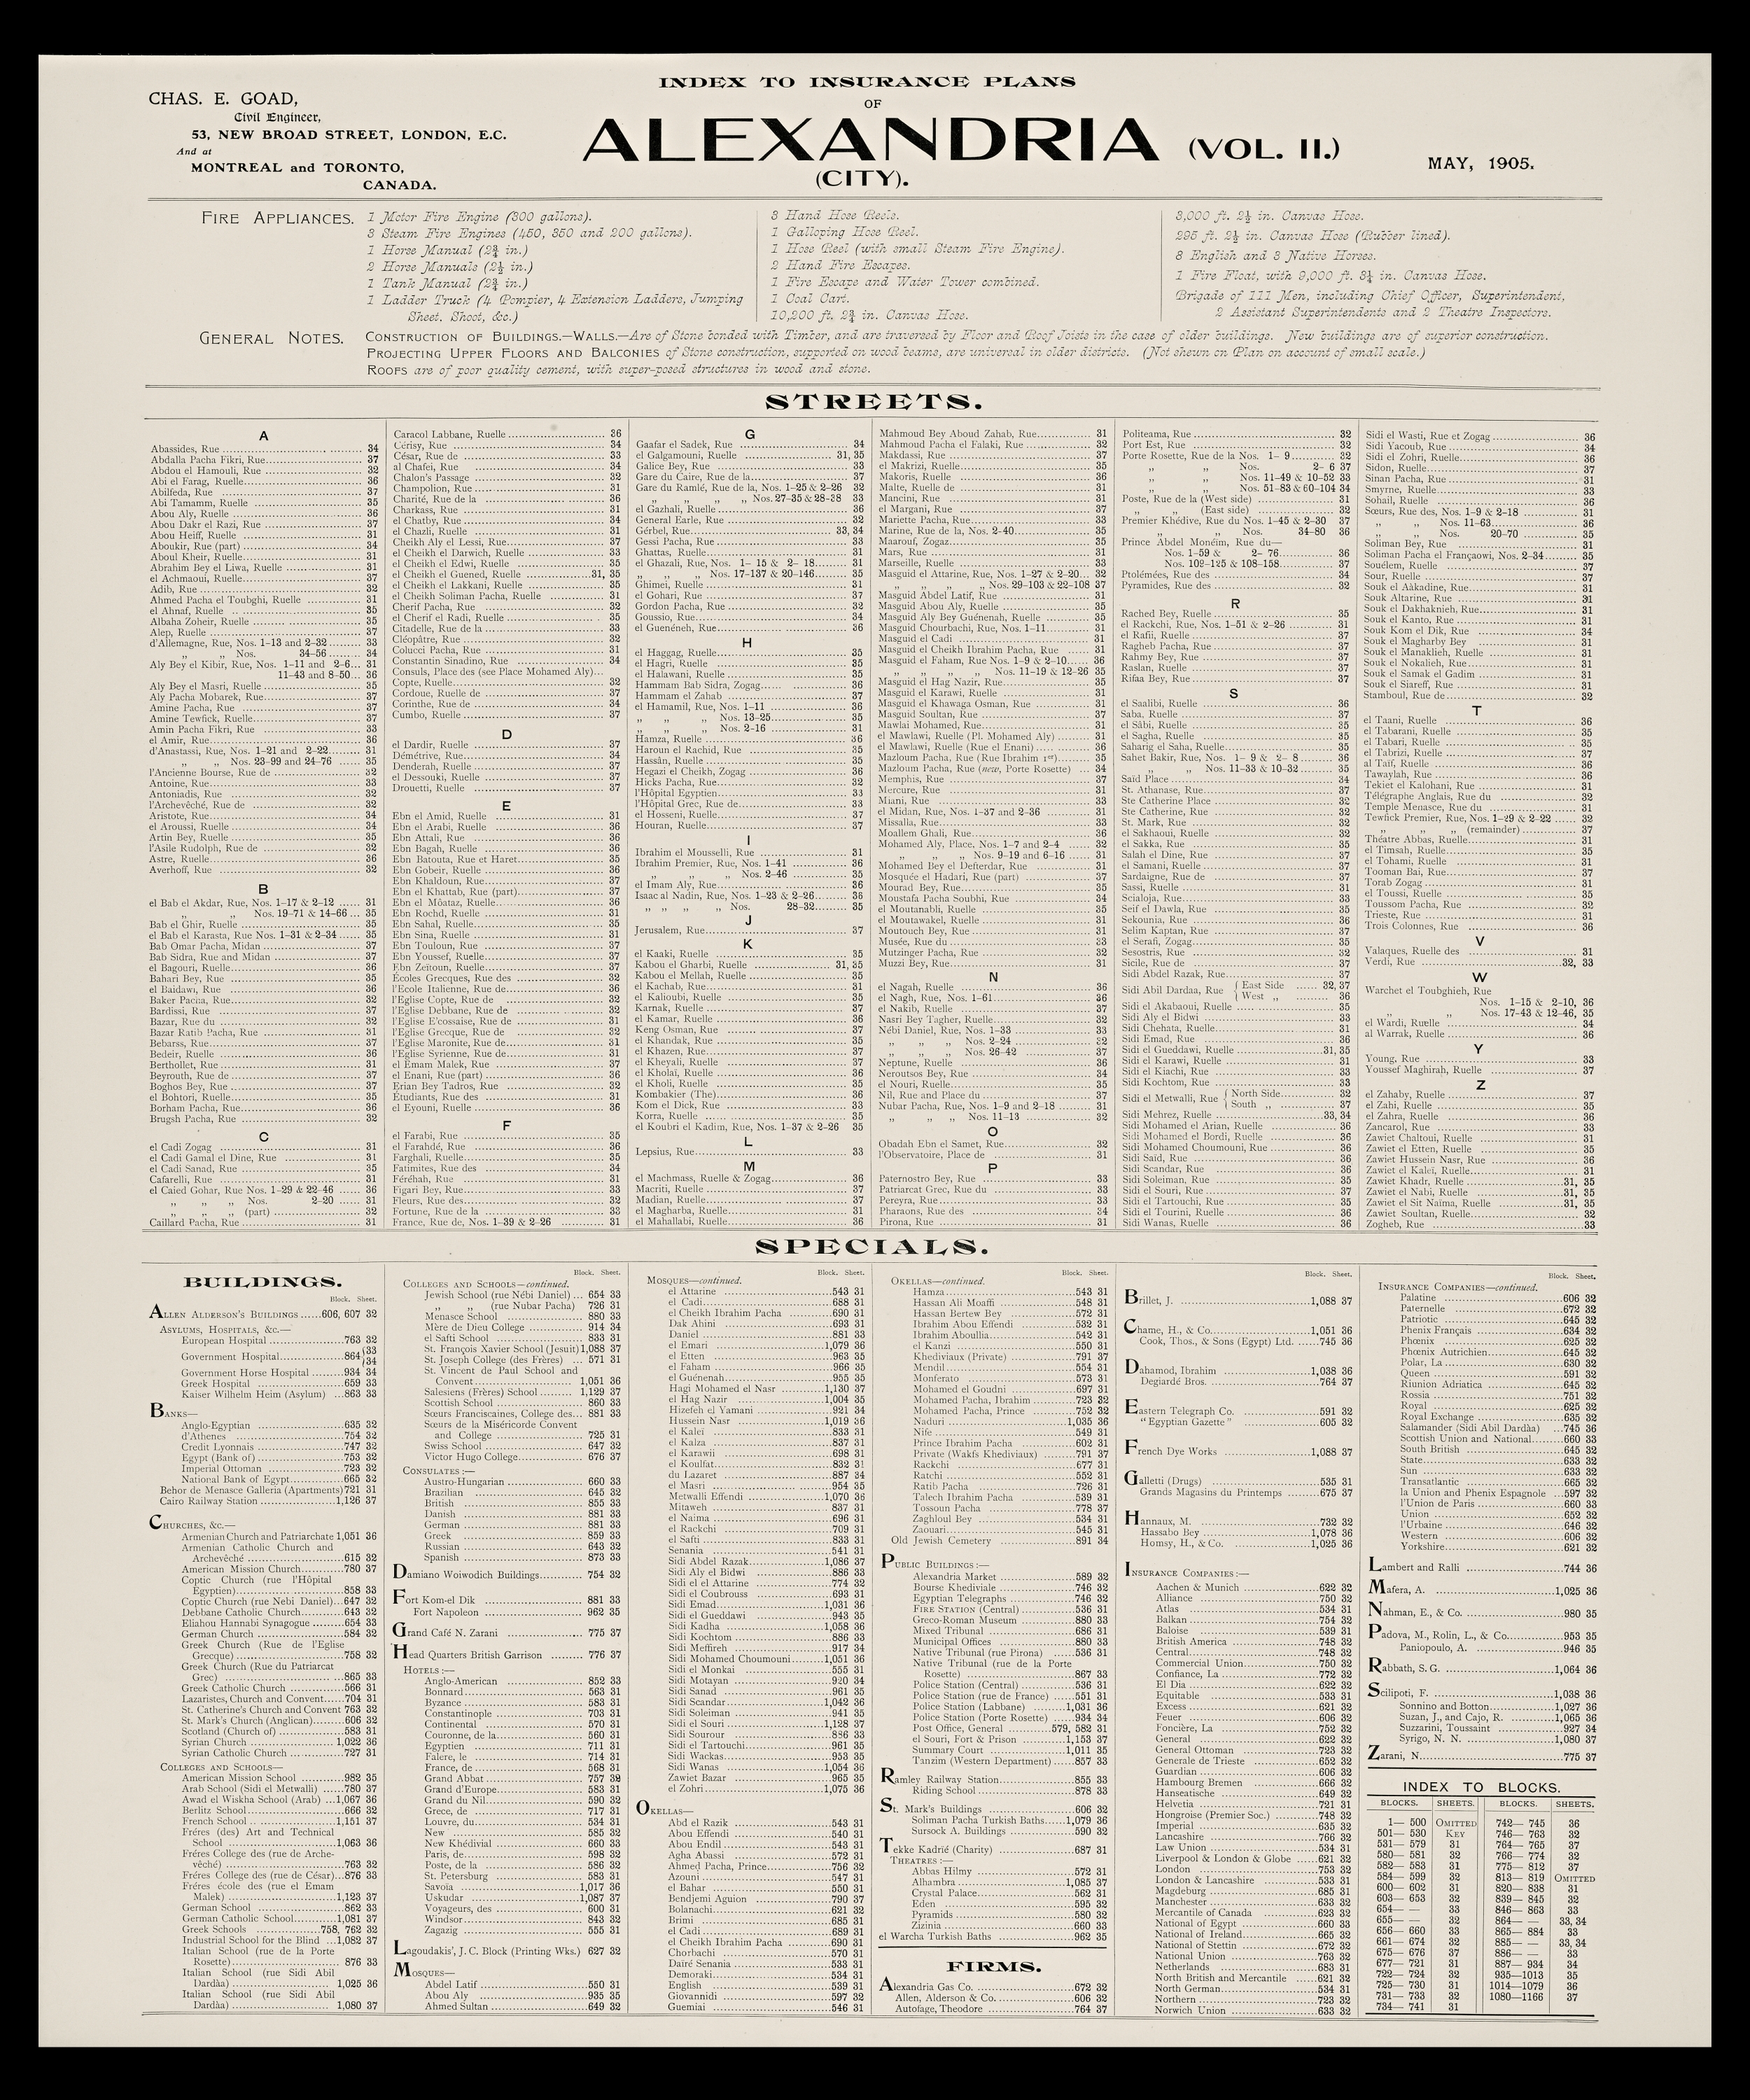 Charles E. Goad - A sheet from the <span style="font-style: italic;">Insurance Plan of Alexandria</span>. The complete set of plans can be found on&nbsp;<a href="https://www.archnet.org/publications/10217/" target="_blank" data-bypass="true">Archnet</a>, or as georeferenced versions in the&nbsp;<a href="http://calvert.hul.harvard.edu:8080/opengeoportal/openGeoPortalHome.jsp?BasicSearchTerm=ExternalLayerId:1203" target="_blank" data-bypass="true">Harvard Geospatial Library</a>.